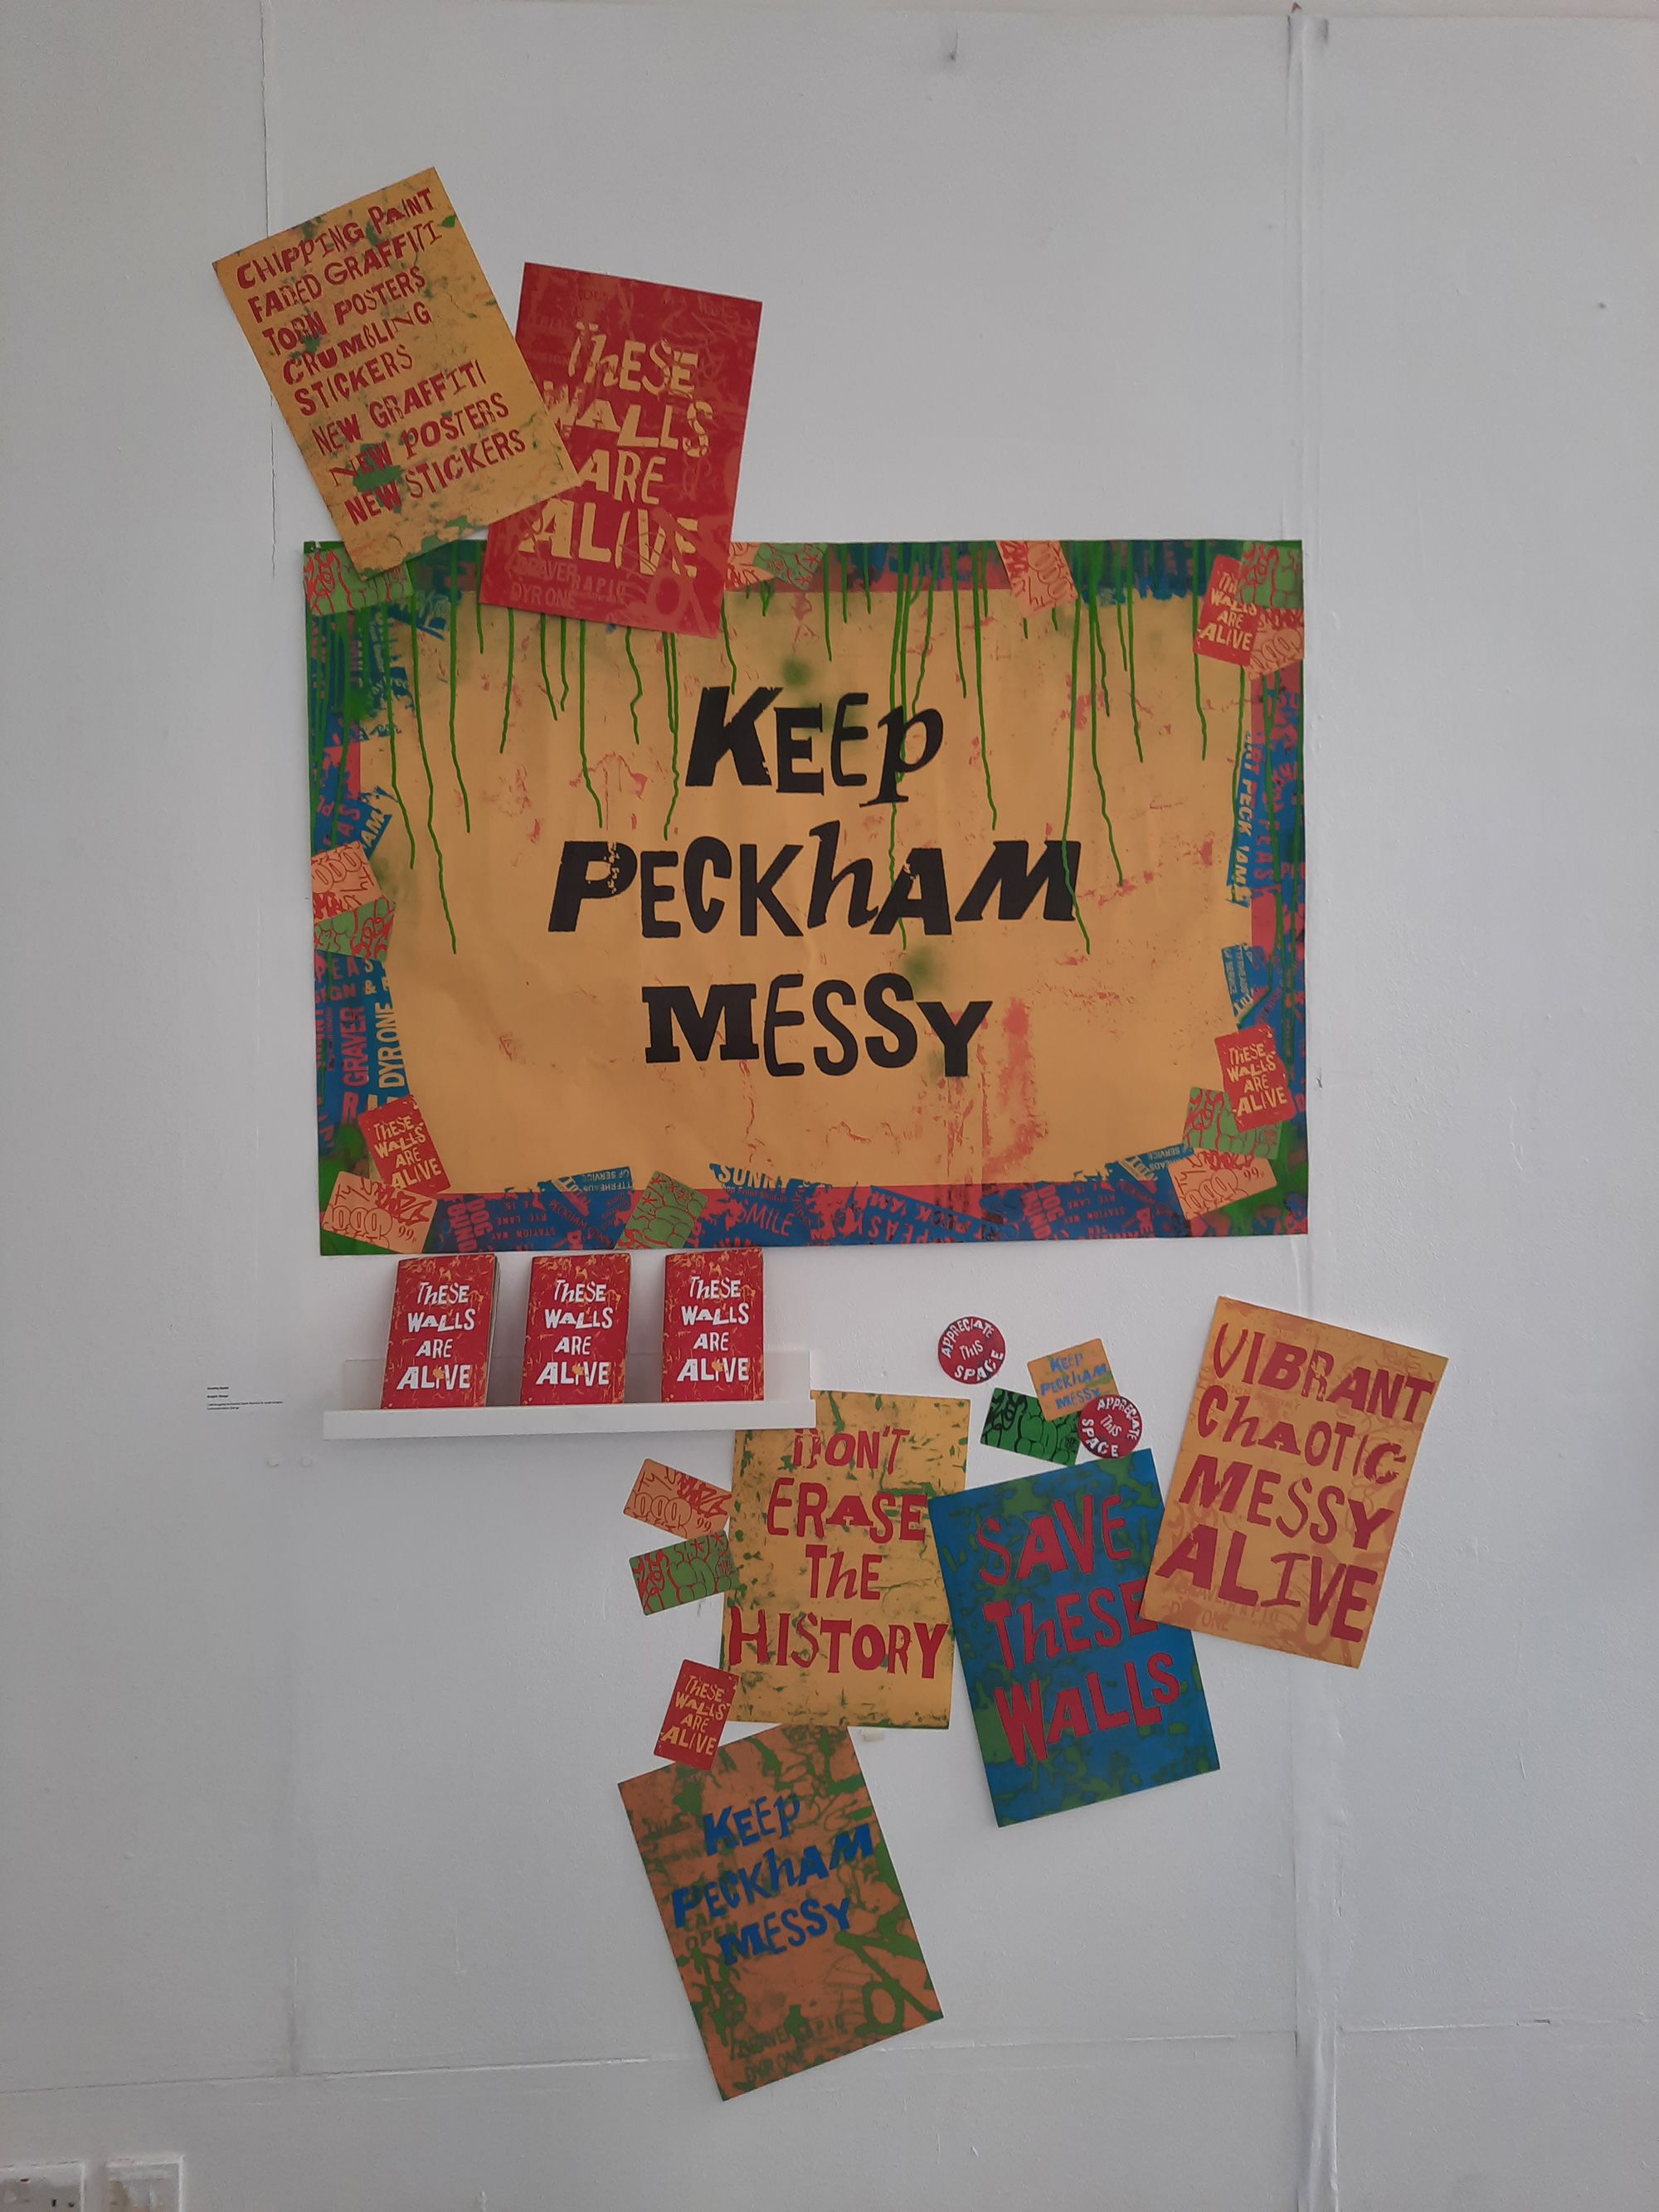 Image shows a large landscape poster with the words ‘ Keep Peckham Messy’ which is centred, the post is surrounded by smaller portrait posters, stickers and postcodes saying ‘ These walls are alive’ ‘Don’t erase the history’ and ‘Vibrant, Chaotic, Messy, Alive’.  Colours used are yellows, reds and greens.